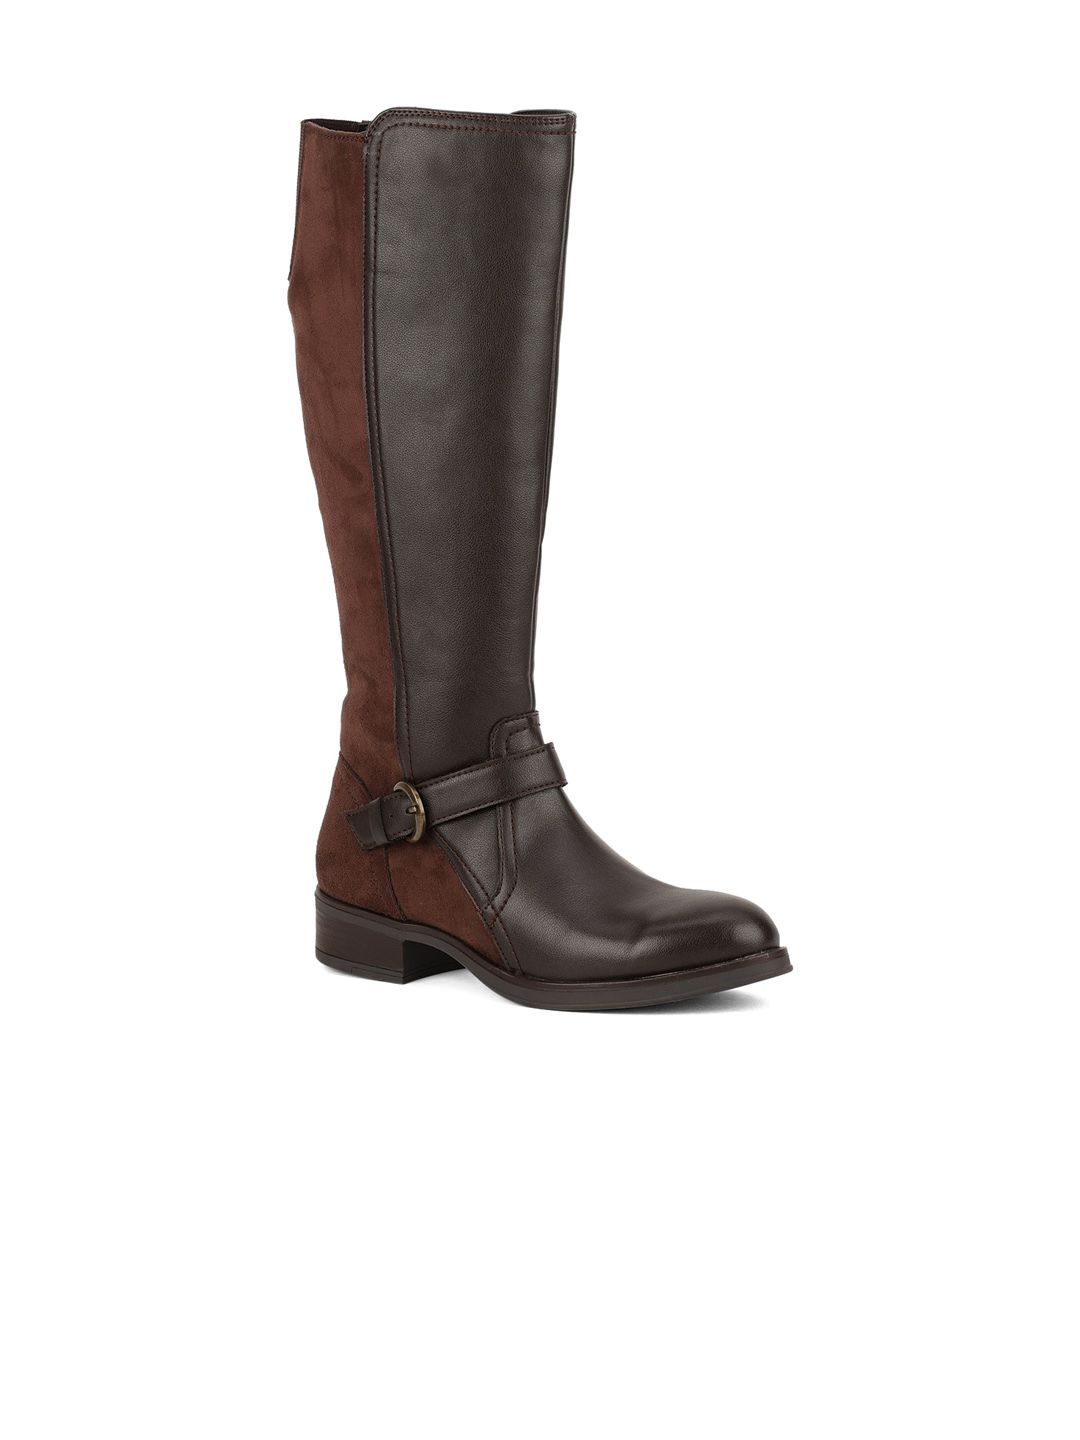 Bruno Manetti Women Brown Leather Flat Boots Price in India